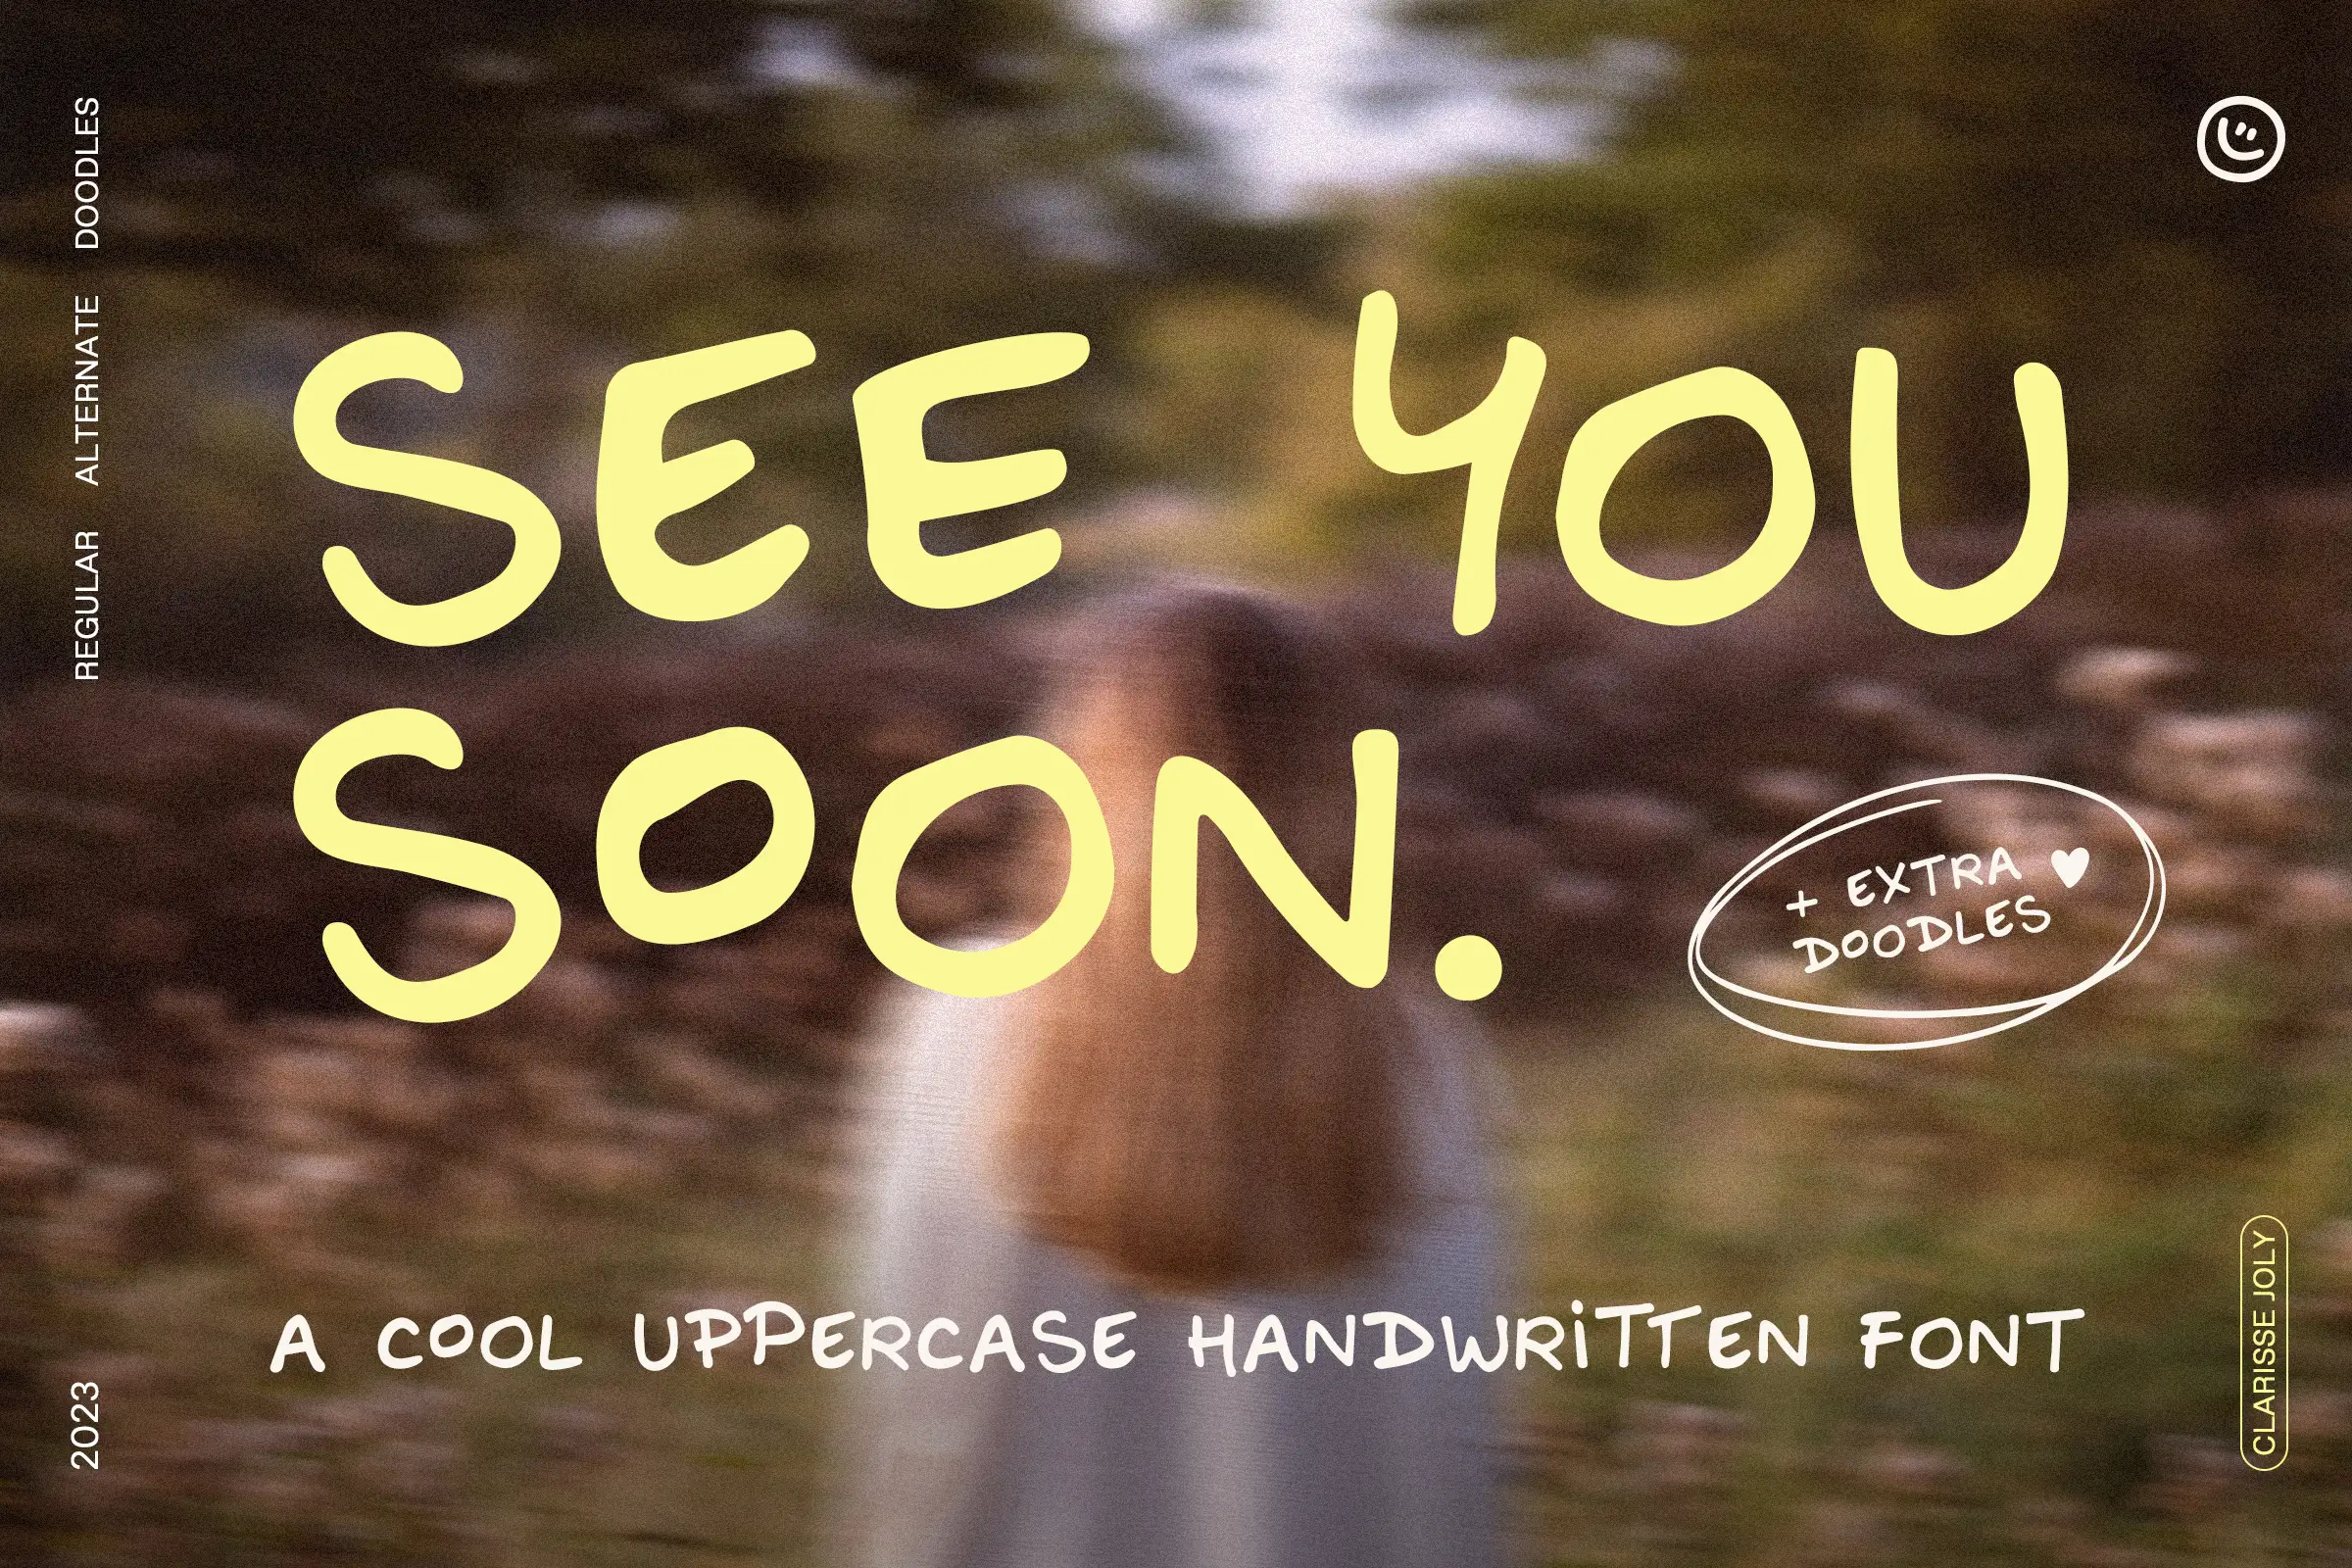 Typographie "see you soon" + extra doodles par Clarisse Joly, a cool uppercase handwritten font